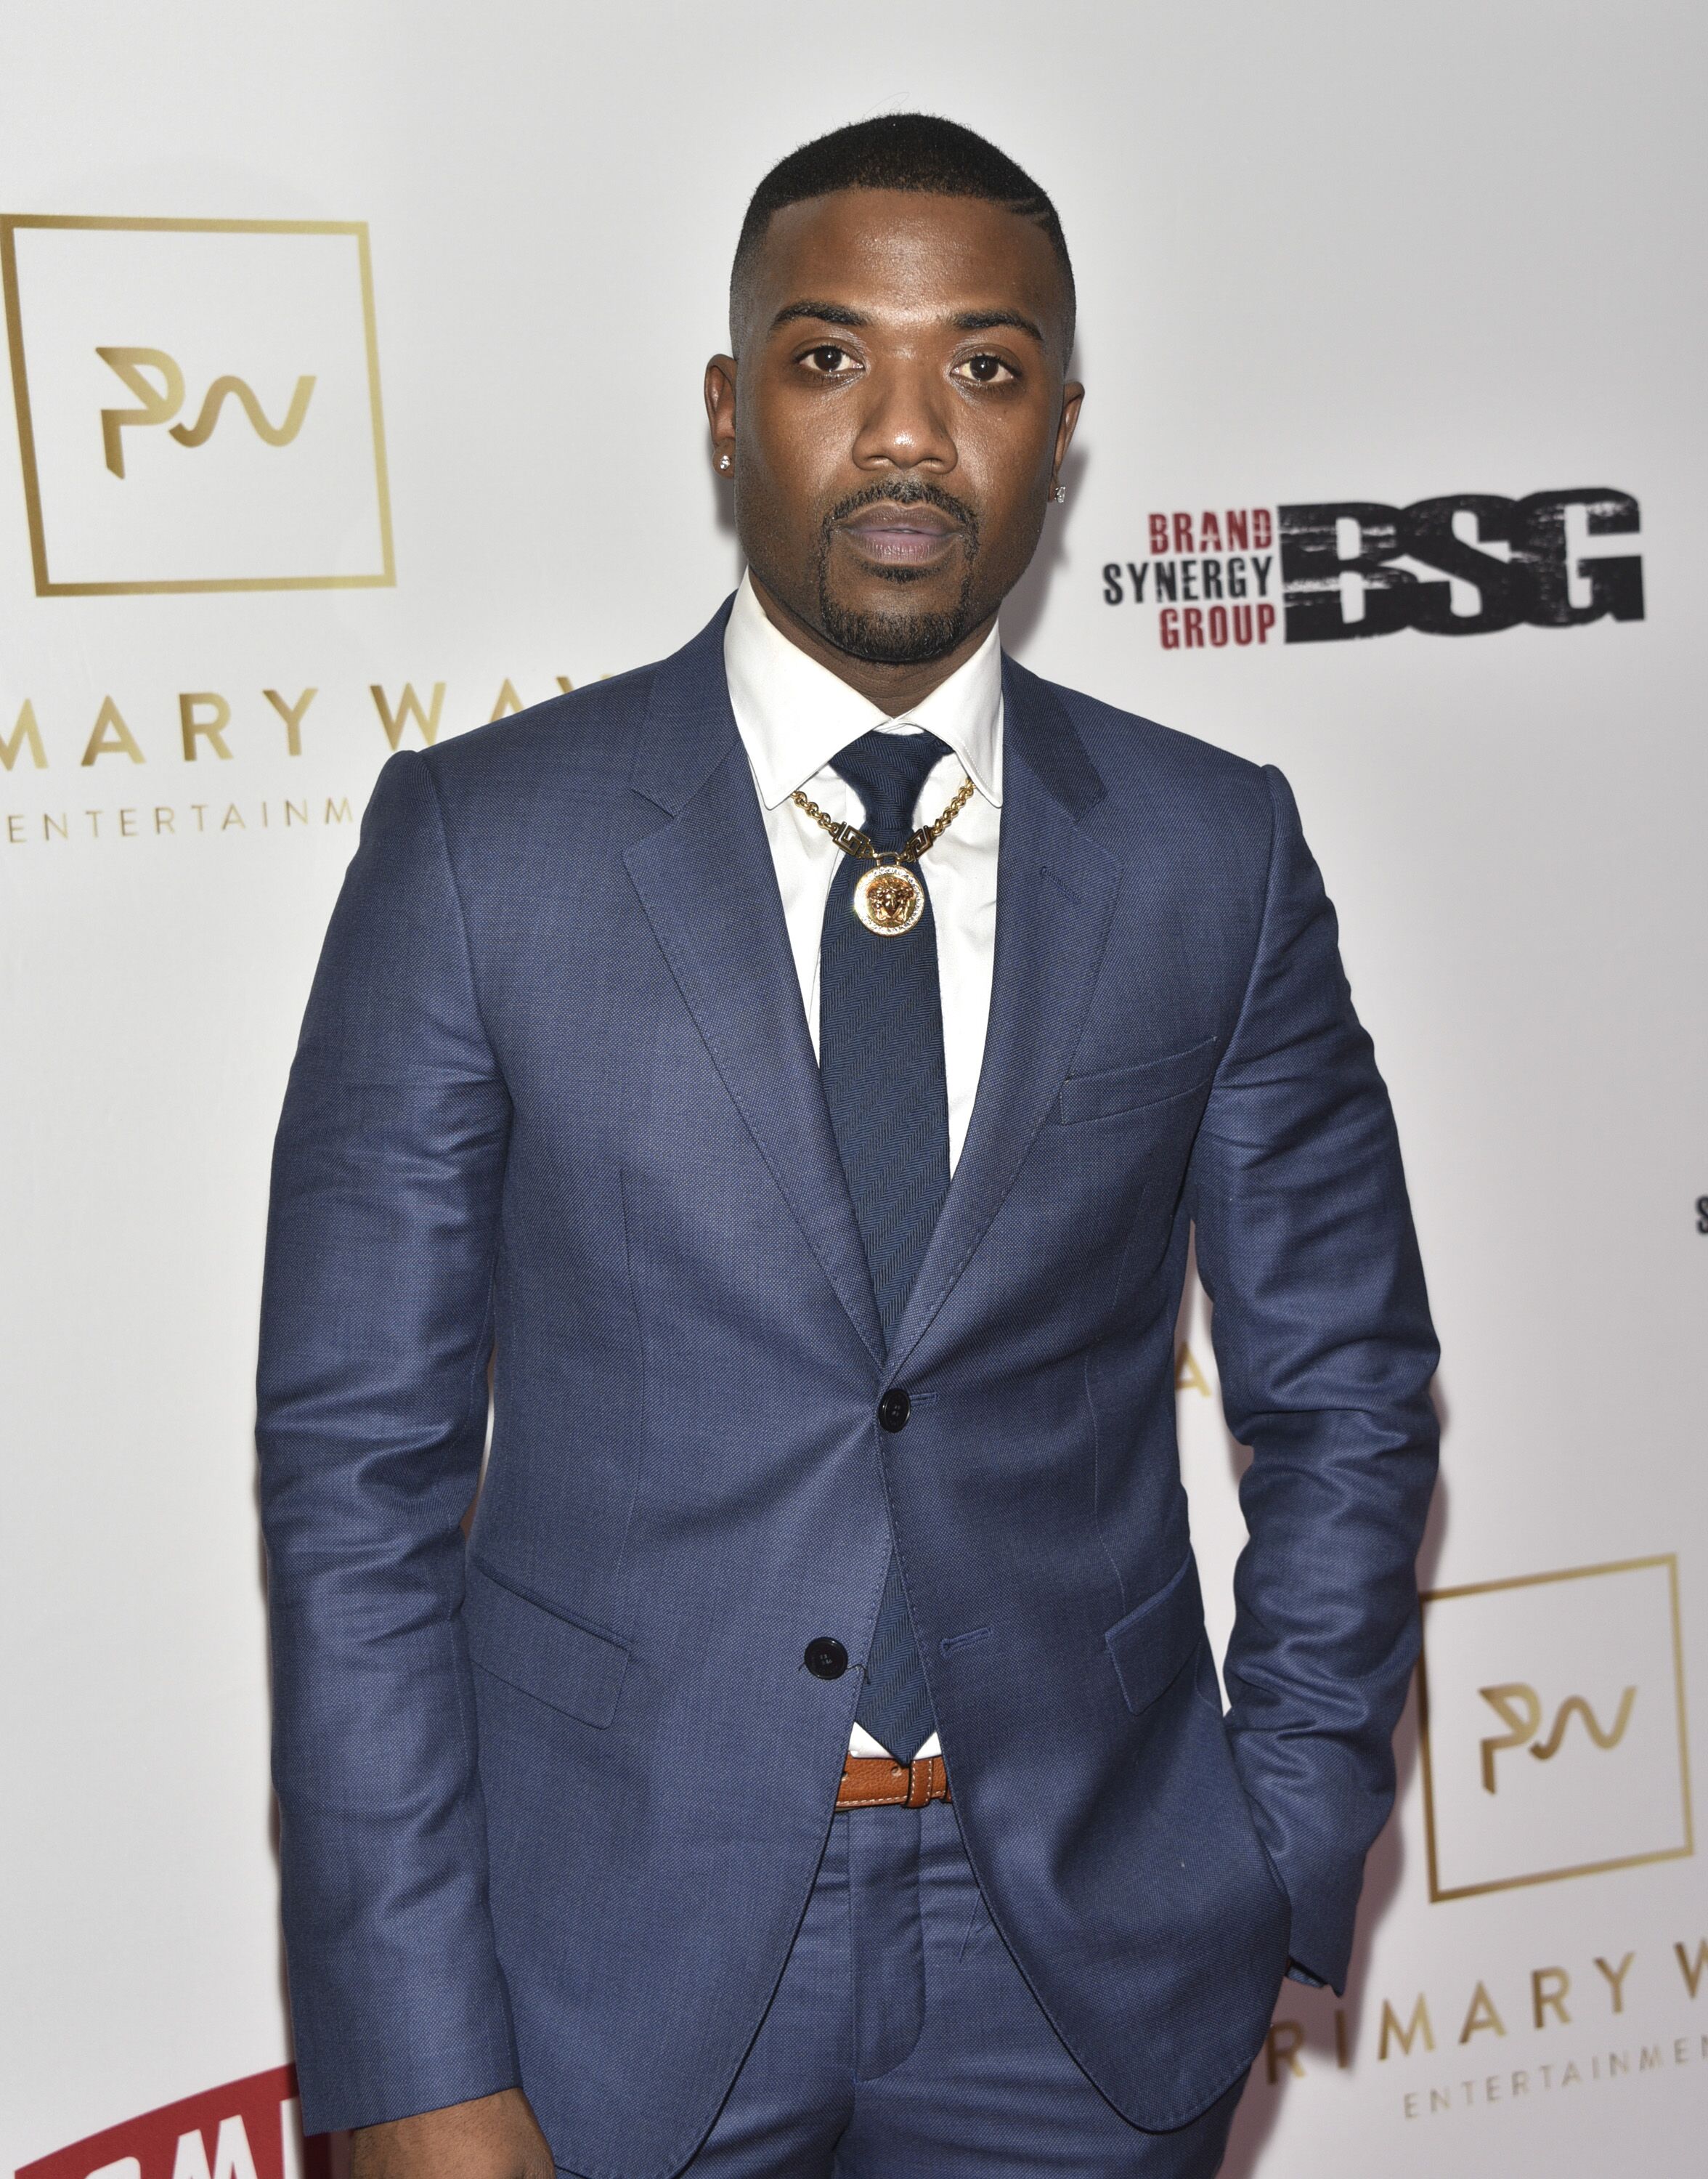 Ray J at an event in West Hollywood in February 2017. | Photo: Getty Images